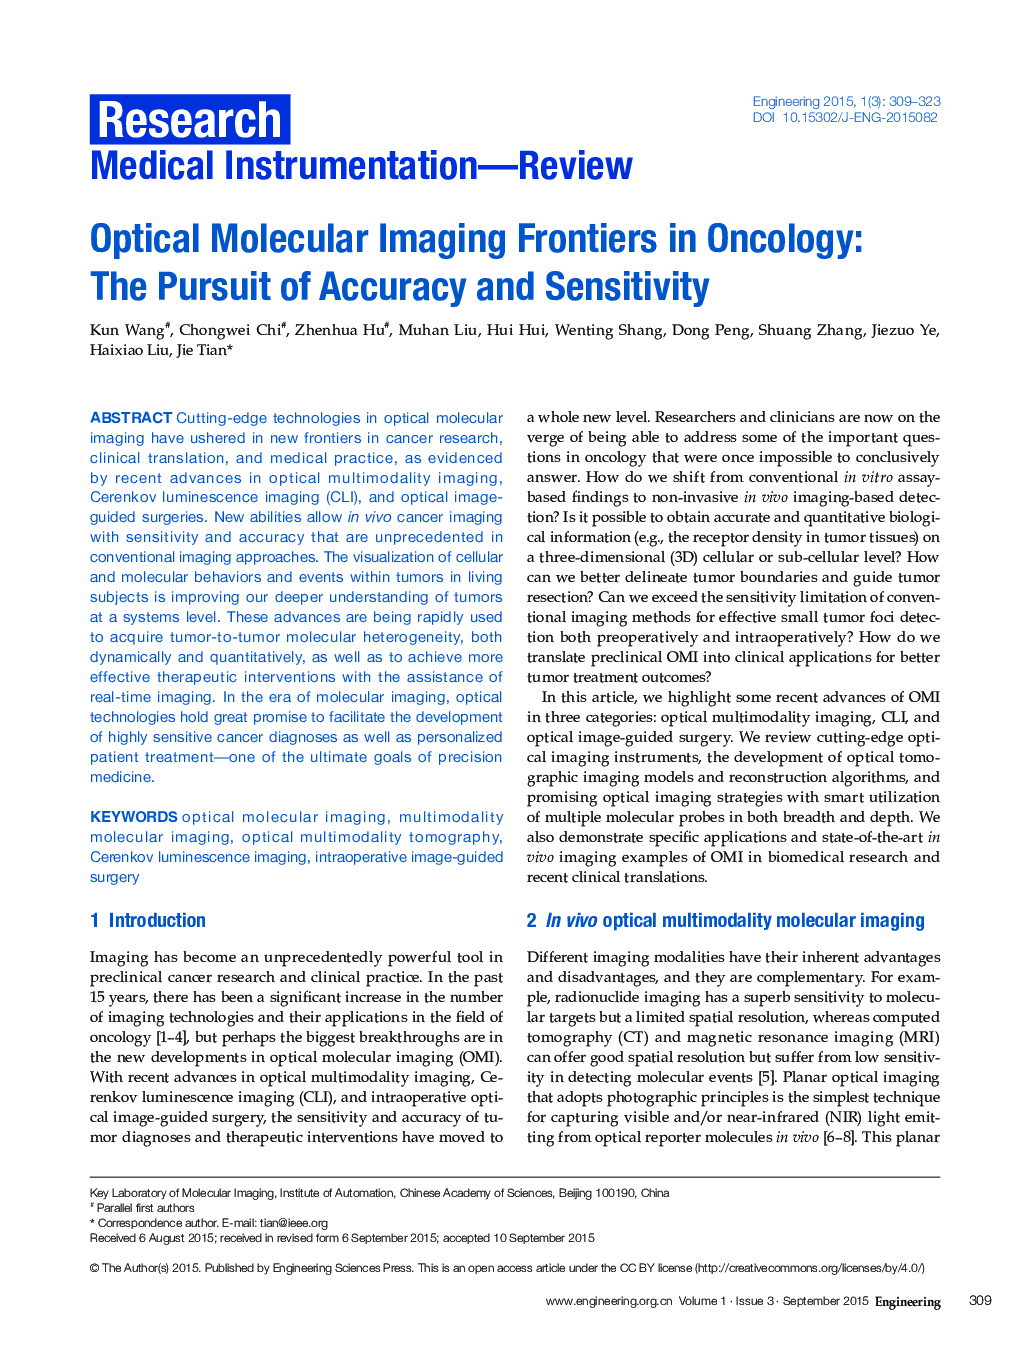 Optical Molecular Imaging Frontiers in Oncology: The Pursuit of Accuracy and Sensitivity